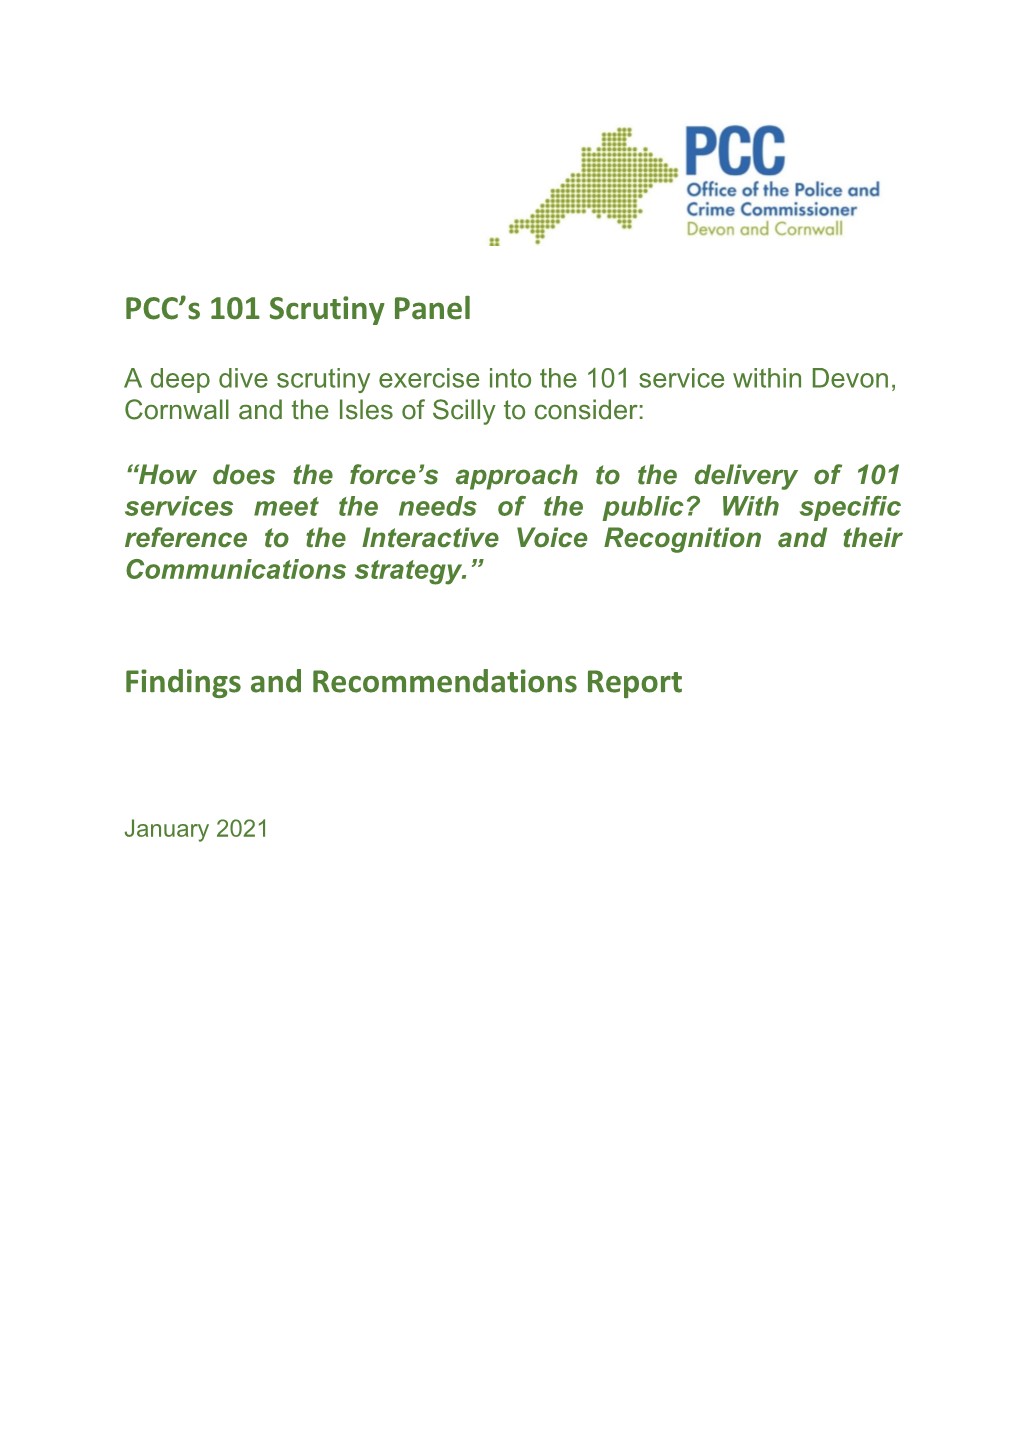 PCC's 101 Scrutiny Panel Findings and Recommendations Report